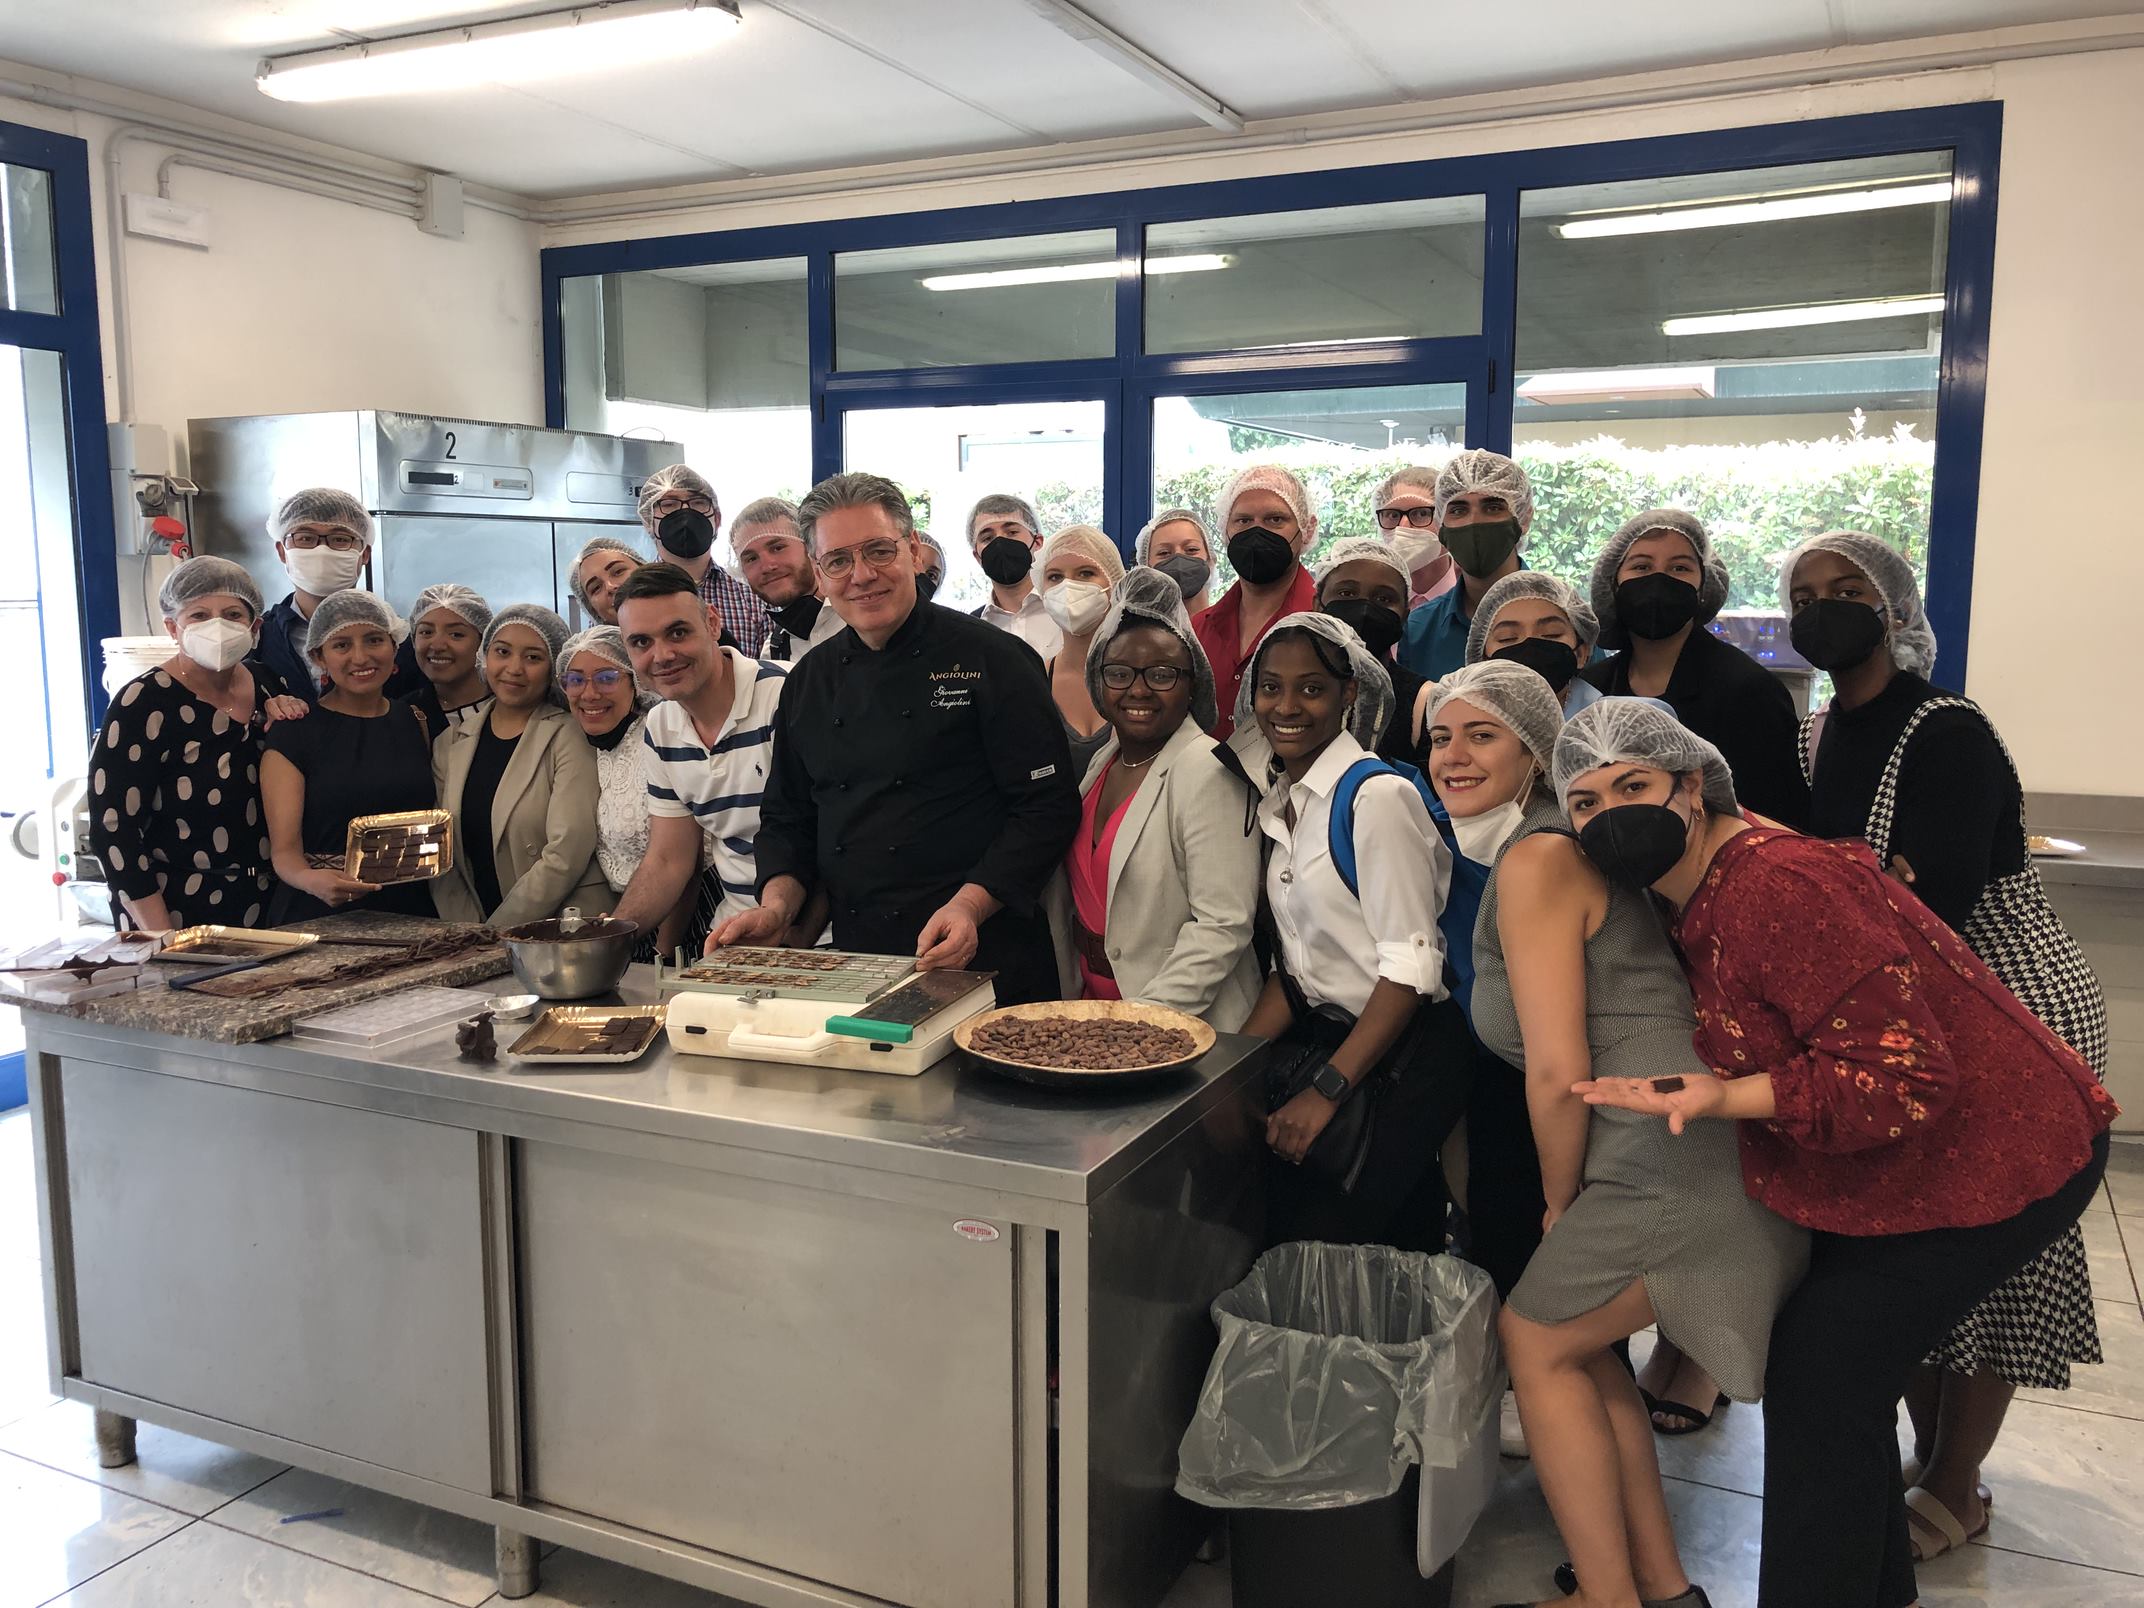 Visiting an Italian chocolate factory was a group favorite.